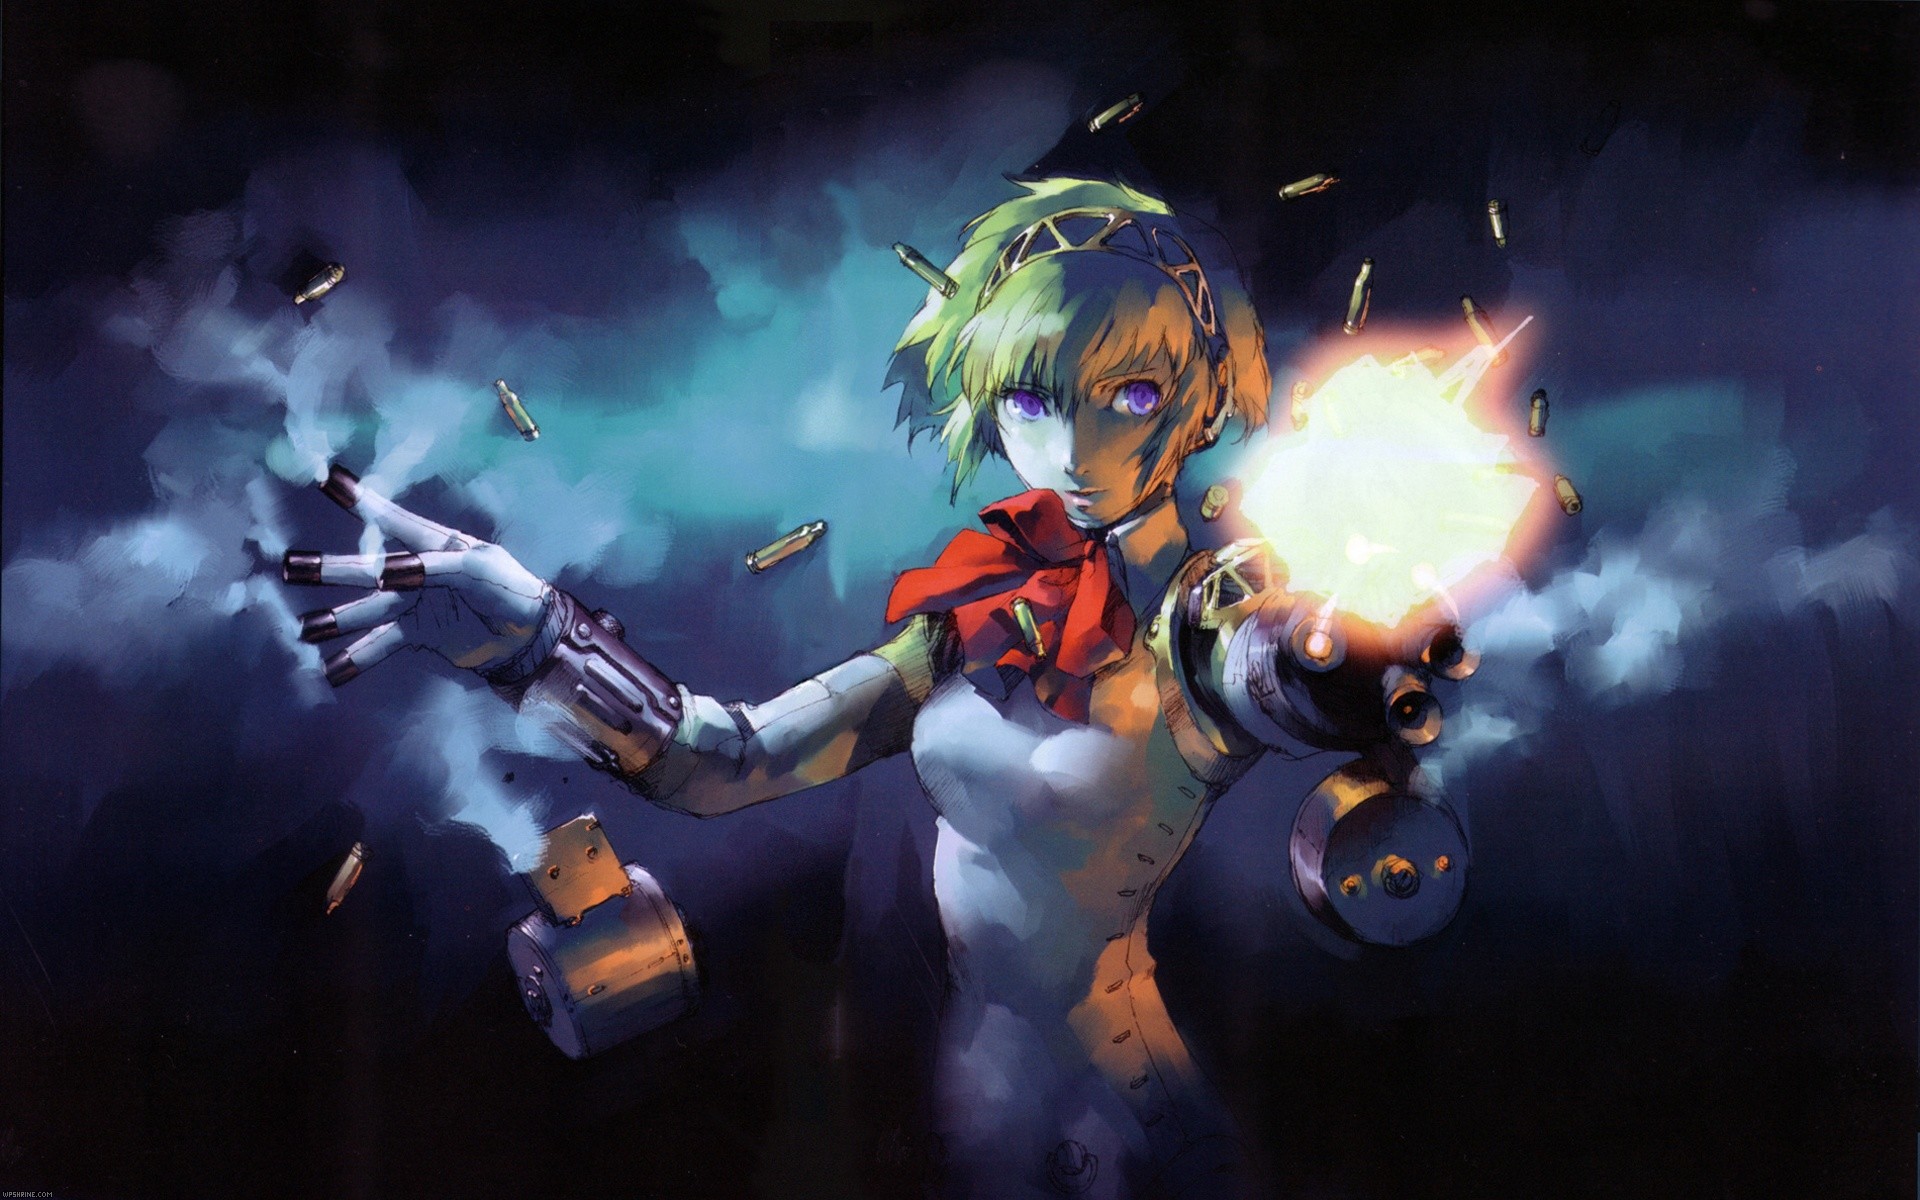 1920x1200 Aigis/Aegis - Click image for bigger size and better quality